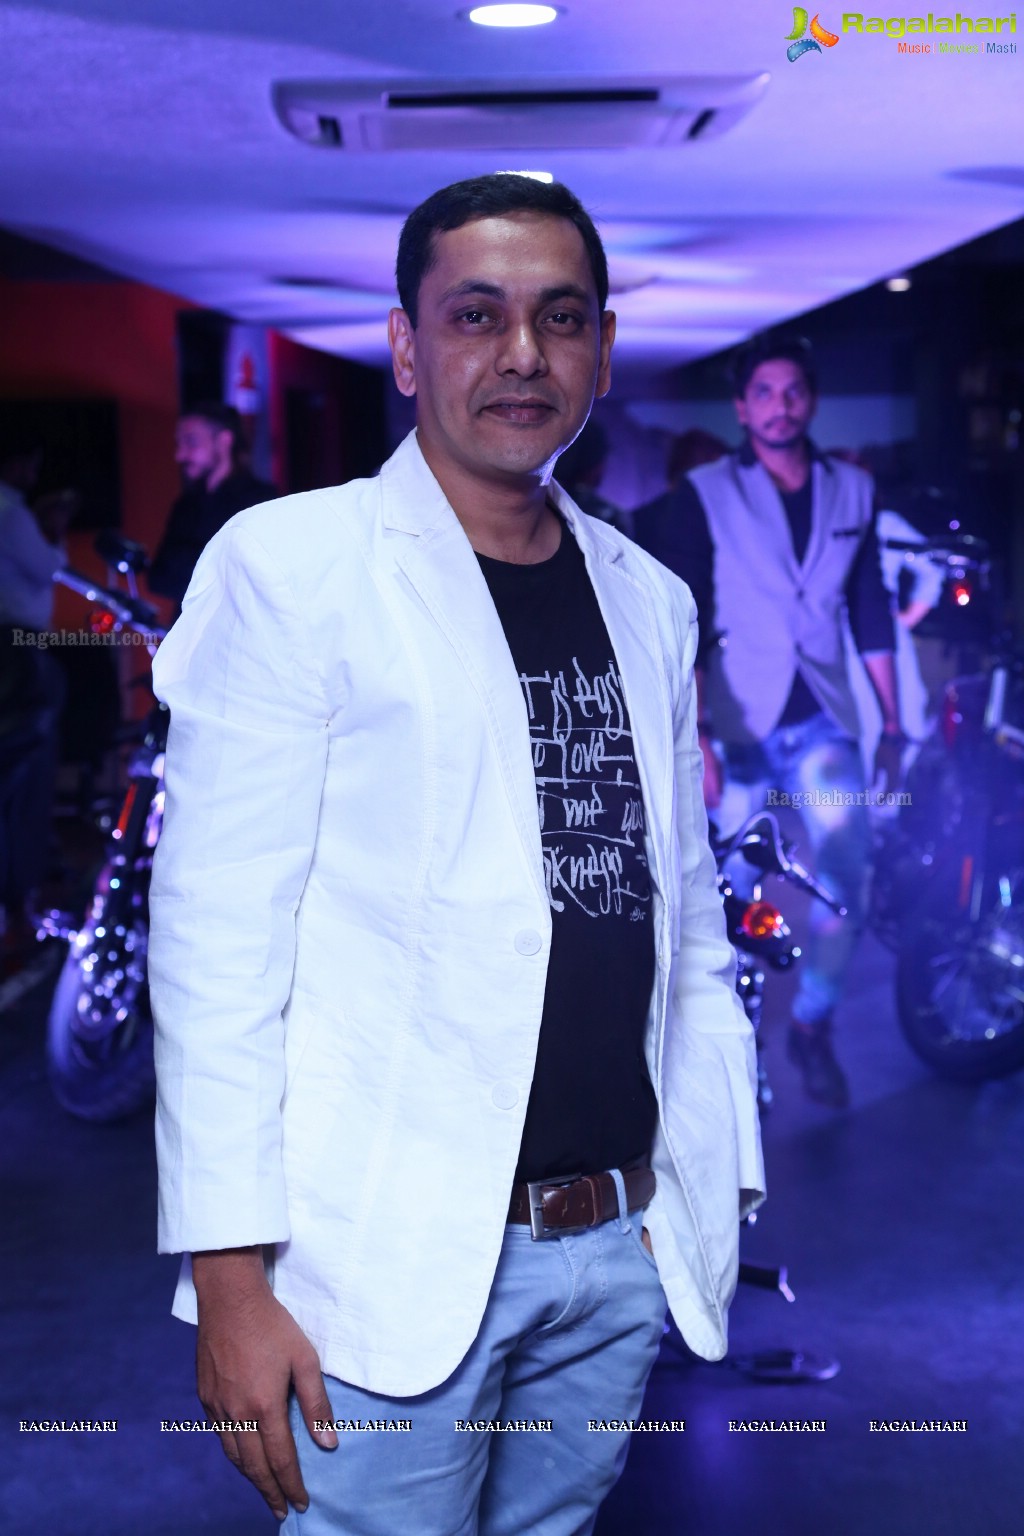 The Harley Fashion Evening - An Evening of Fashion, Glamour and Motor Bikes at Harley Davidson Showroom, Hyderabad